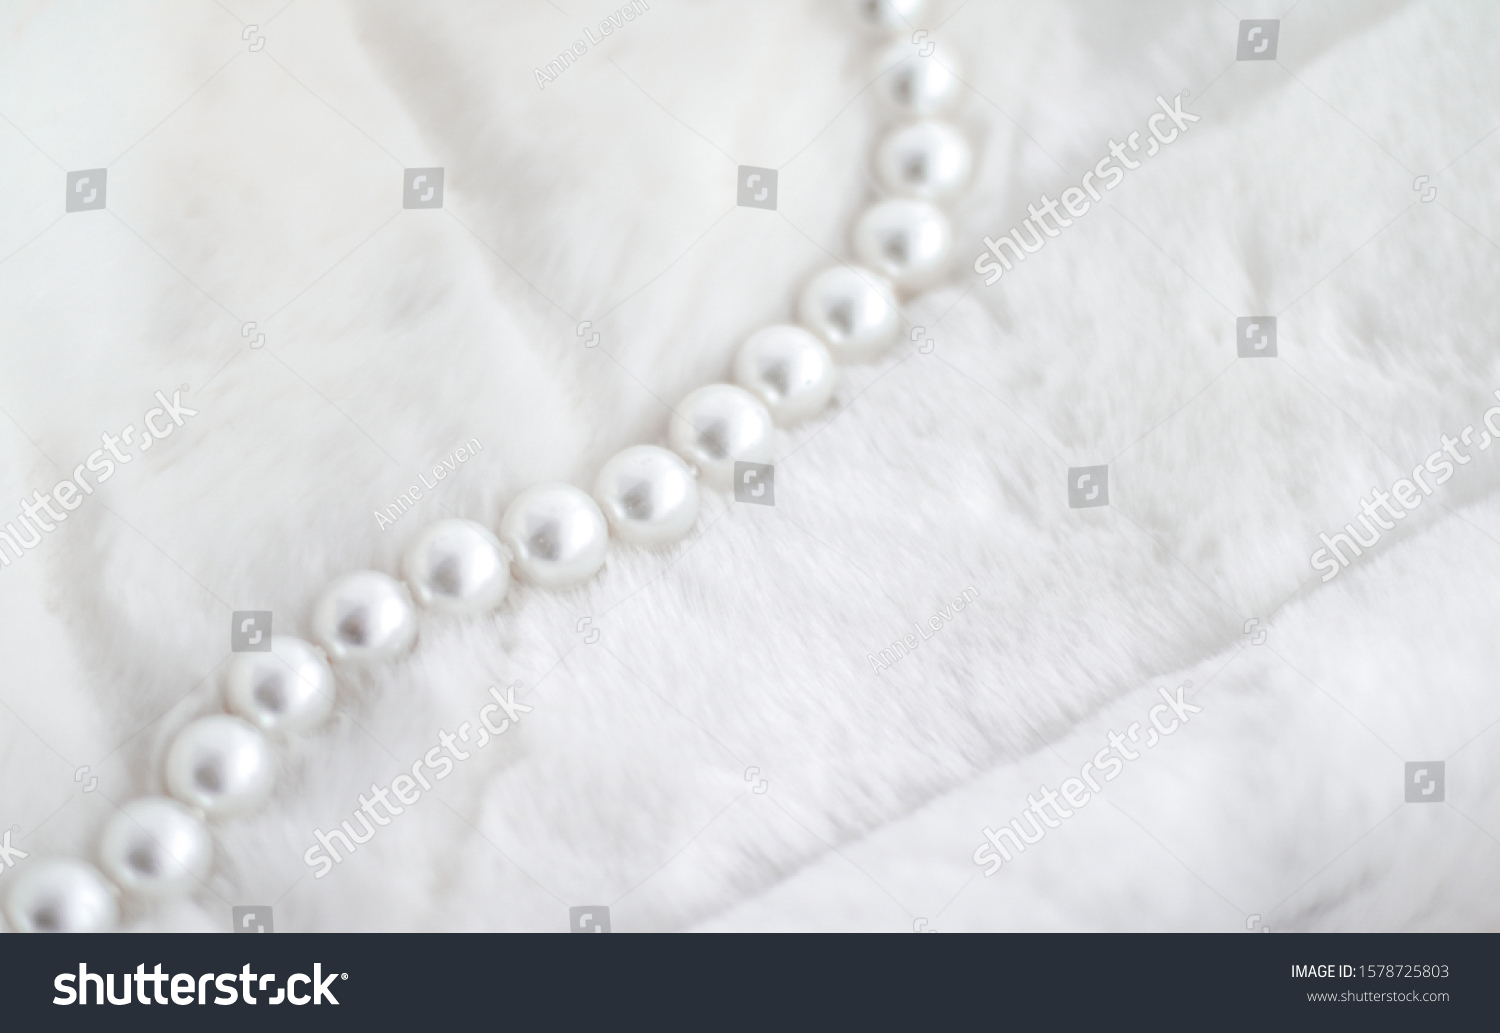 Jewelry branding, elegance and sale concept - Winter holiday jewellery fashion, pearl necklace on fur background, glamour style present and chic gift for luxury jewelery brand shopping, banner design #1578725803